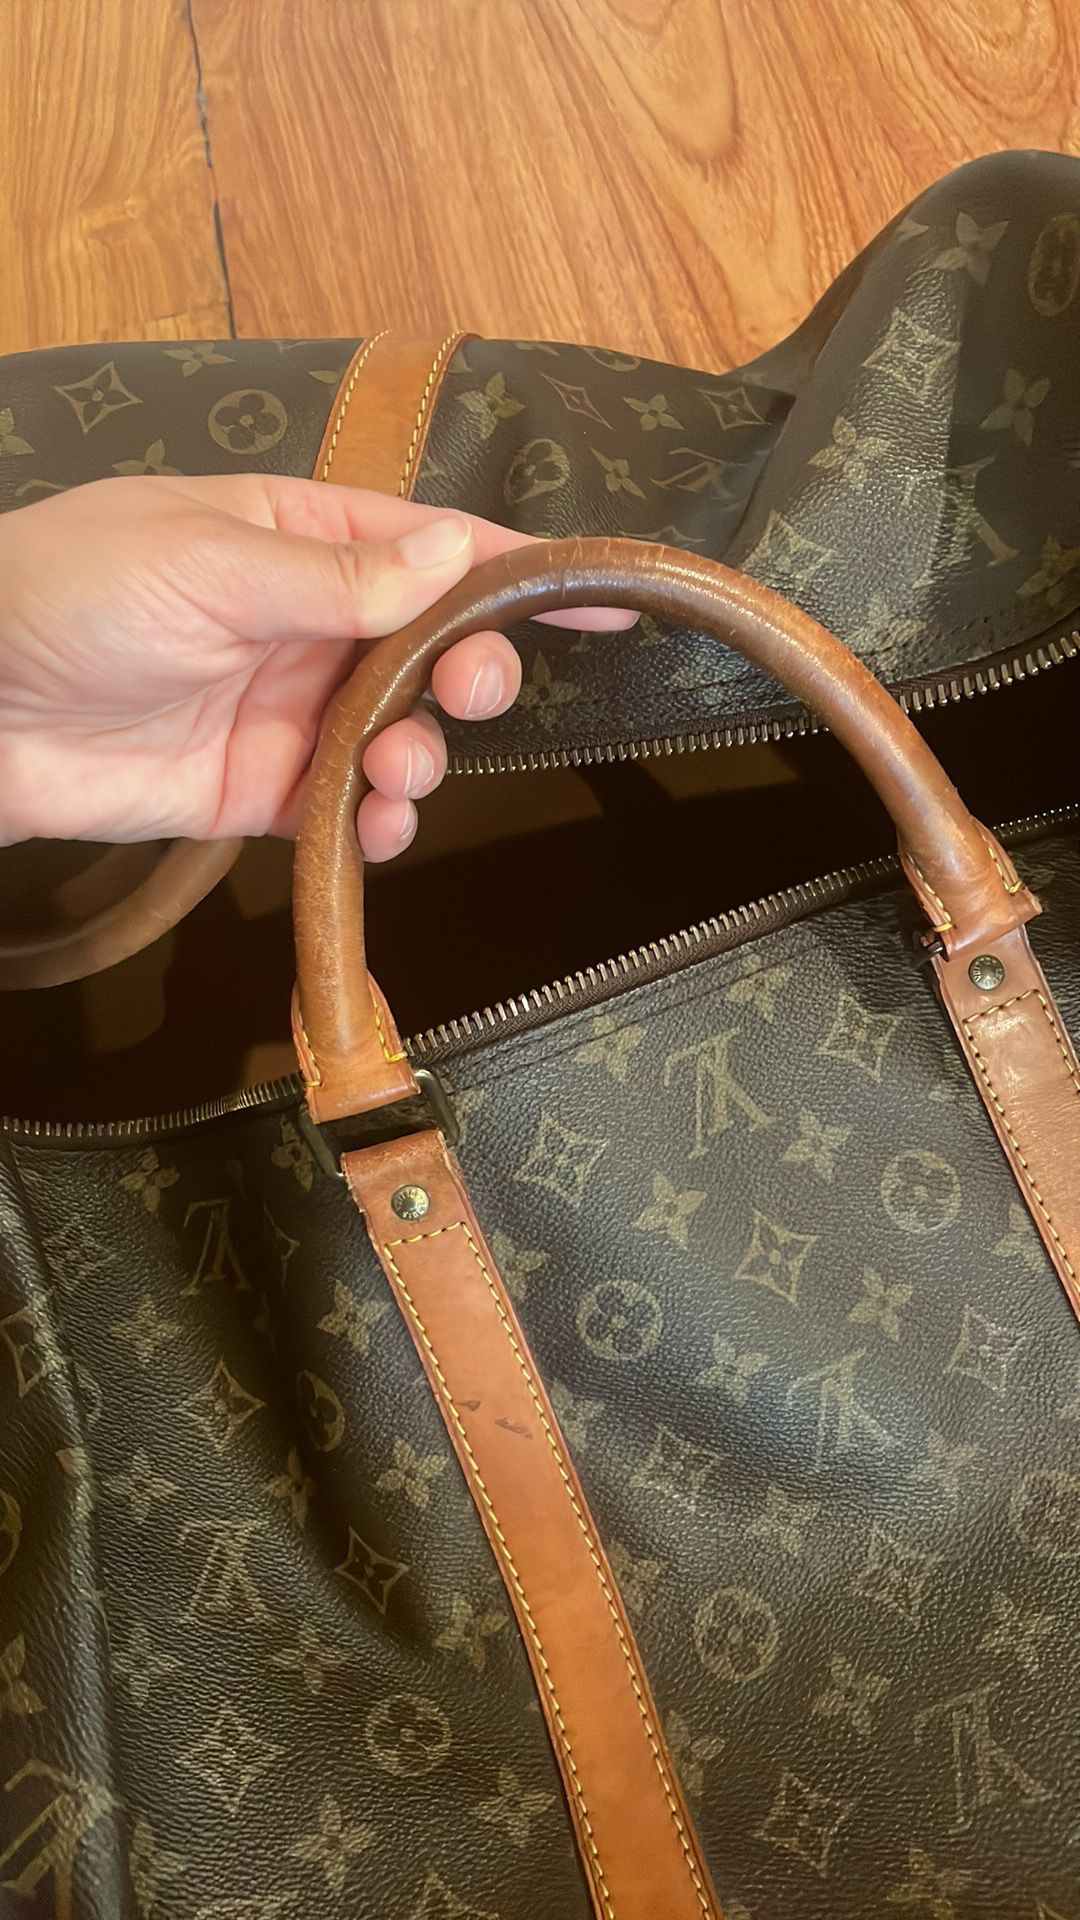 Louis Vuitton Sac Souple 45 Travel Bag for Sale in Hillsboro, OR - OfferUp